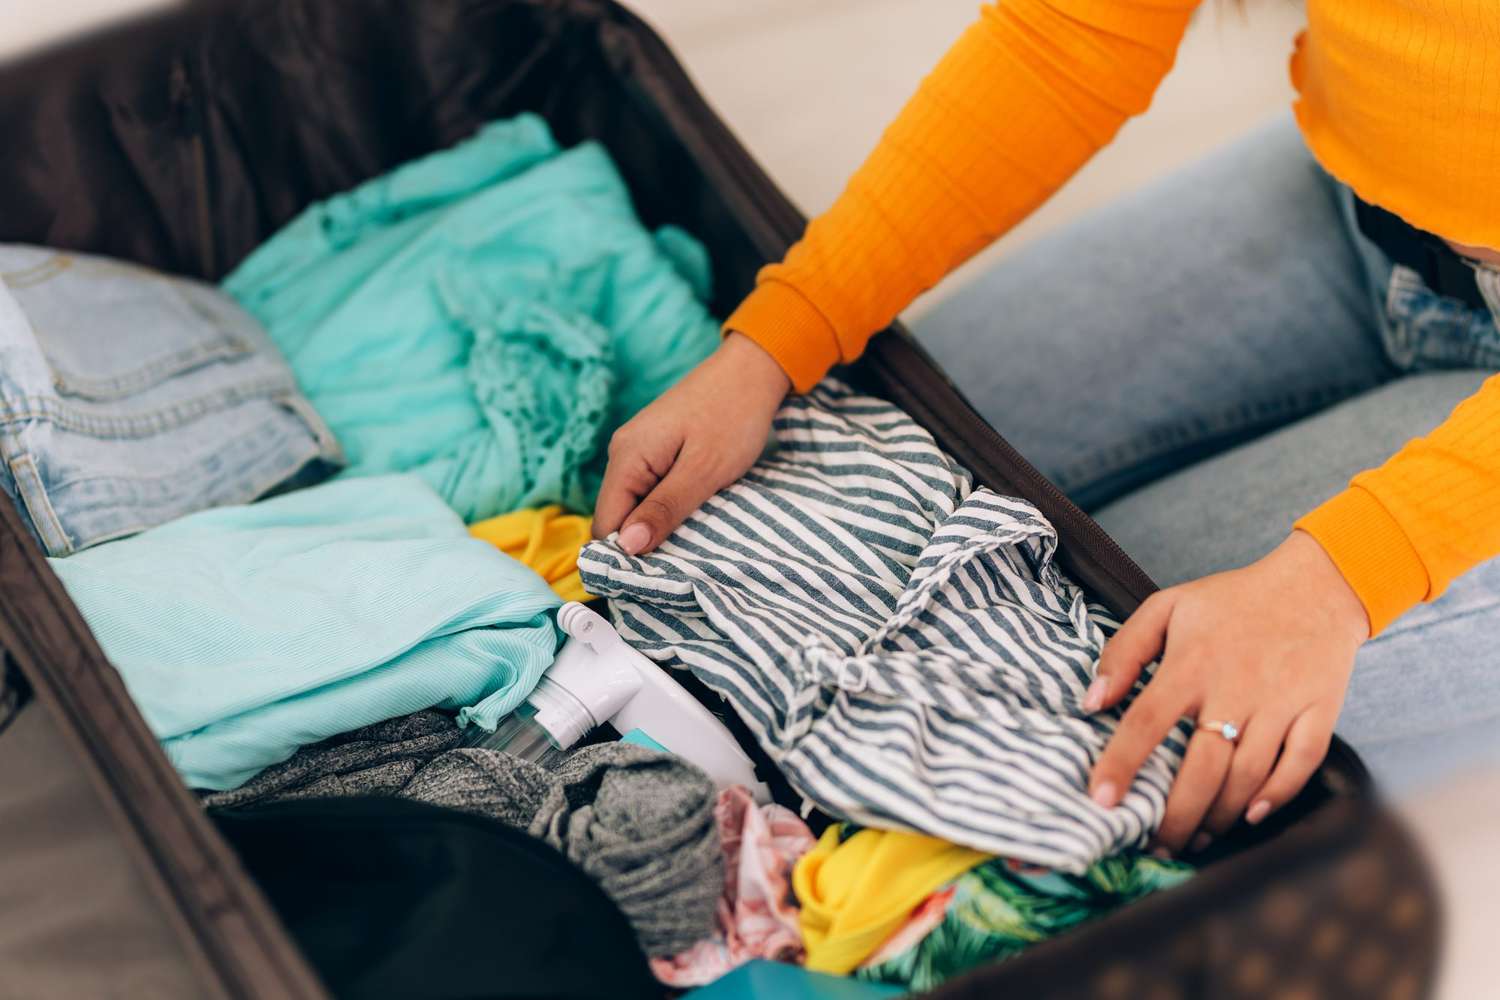 An image of a girl packing.